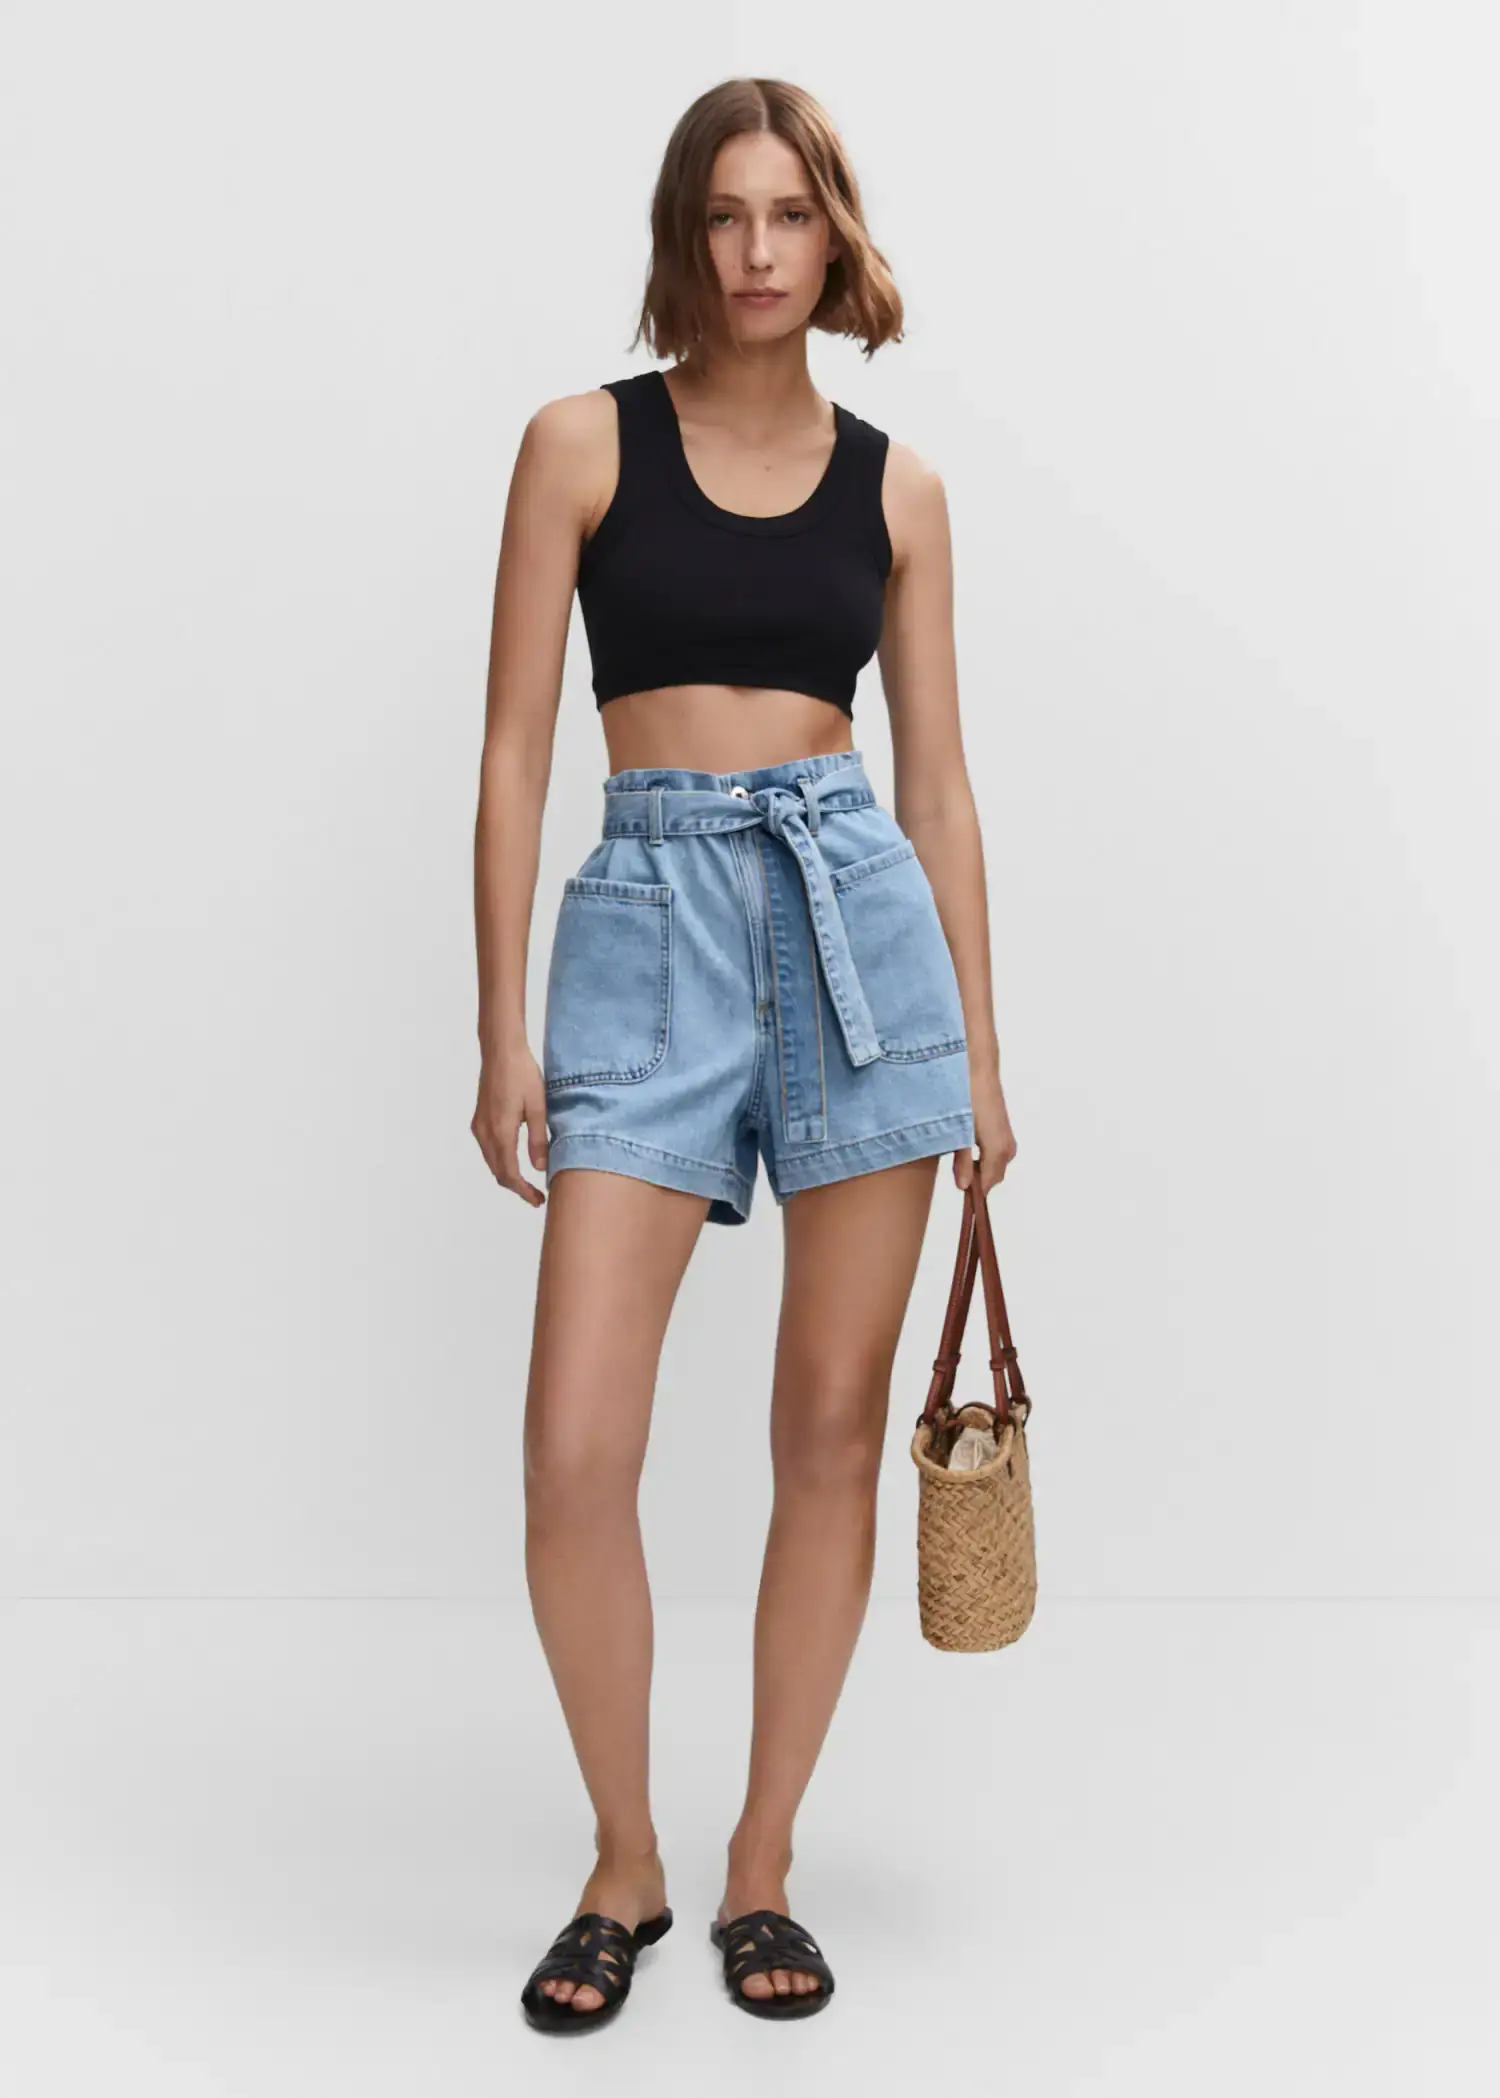 Mango Paperbag shorts with belt. a woman in a black crop top holding a bag. 